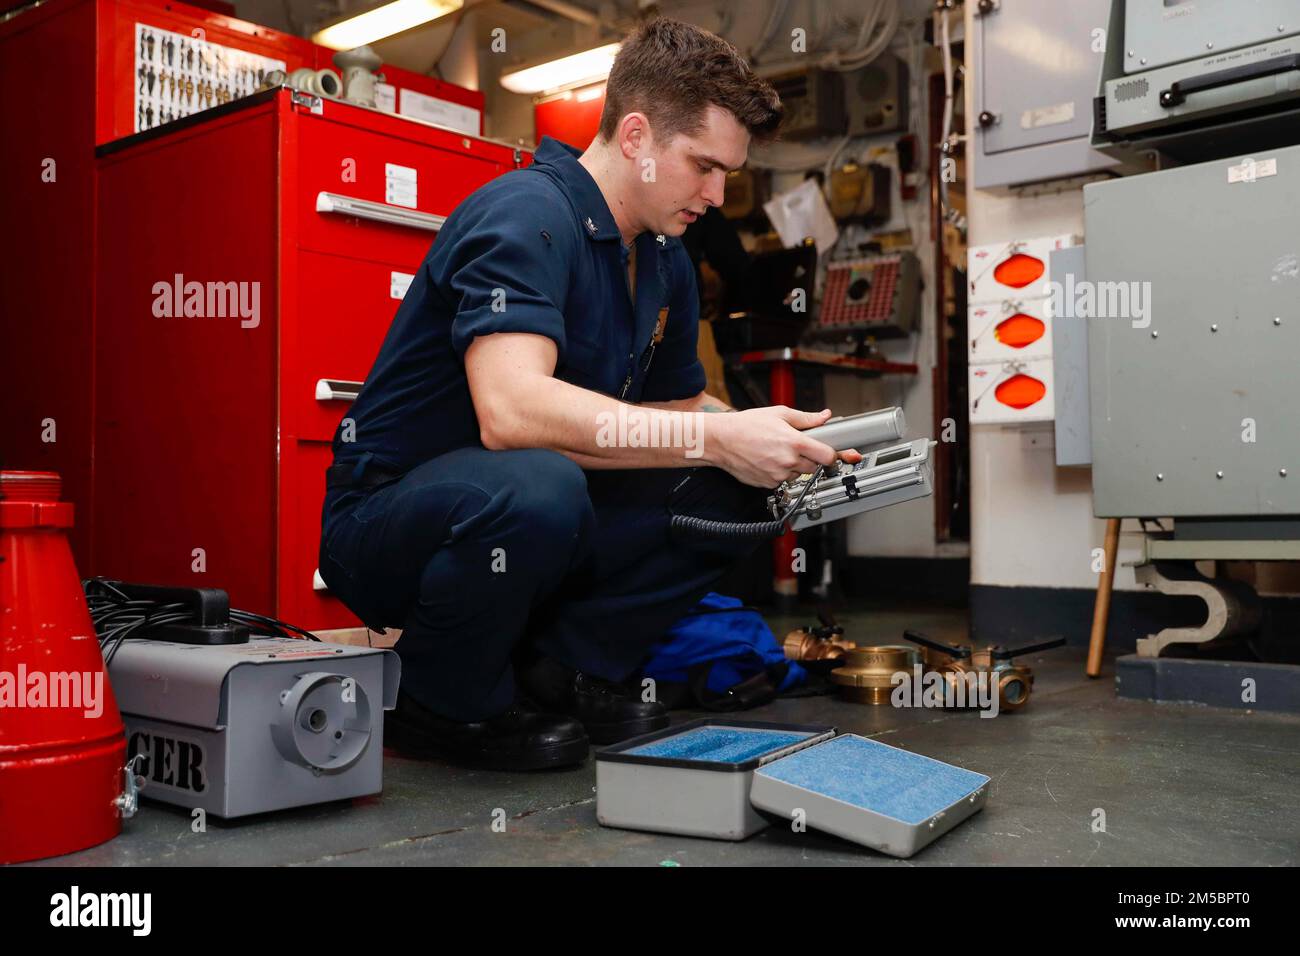 PHILIPPINE SEA (Feb. 24, 2022) Damage Controlman 3rd Class Danny Wallis, from Clifton, Texas, conducts maintenance on a radiacs in a repair locker aboard the Nimitz-class aircraft carrier USS Abraham Lincoln (CVN 72). Abraham Lincoln Strike Group is on a scheduled deployment in the U.S. 7th Fleet area of operations to enhance interoperability through alliances and partnerships while serving as a ready-response force in support of a free and open Indo-Pacific region. Stock Photo